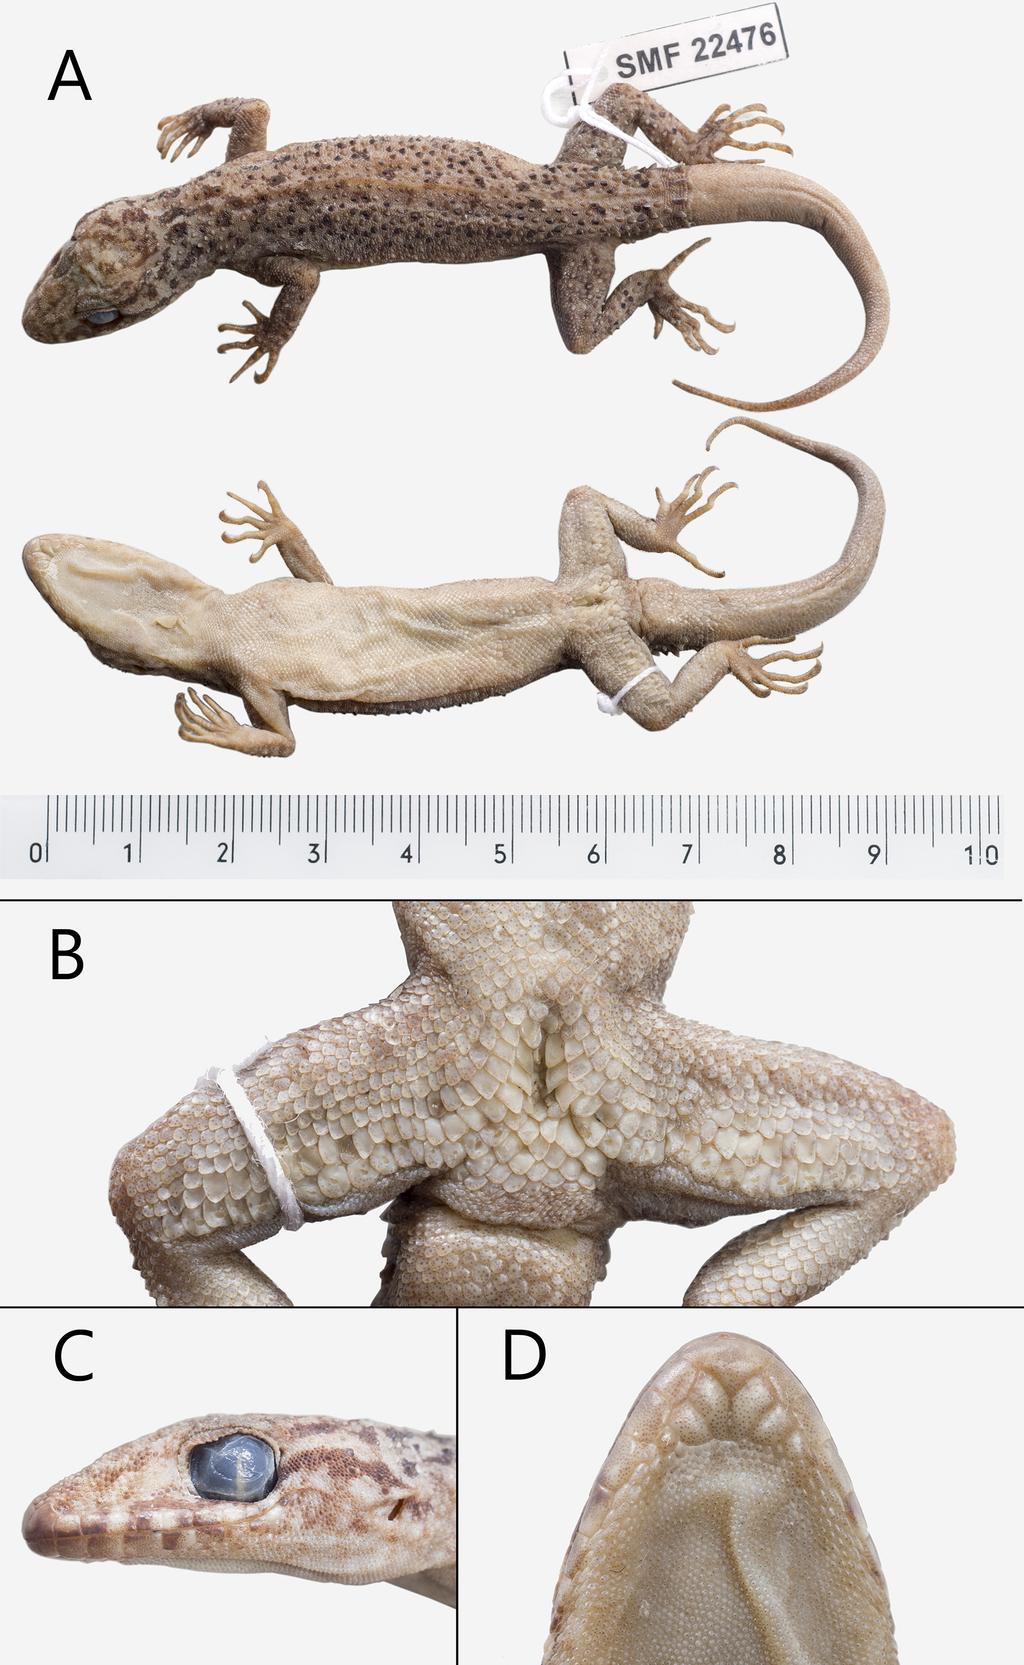 FIGURE 1. Morphological features of the holotype of Cyrtodactylus klakahensis sp. nov. (SMF 22476). (A) Dorsal and ventral view of the body.